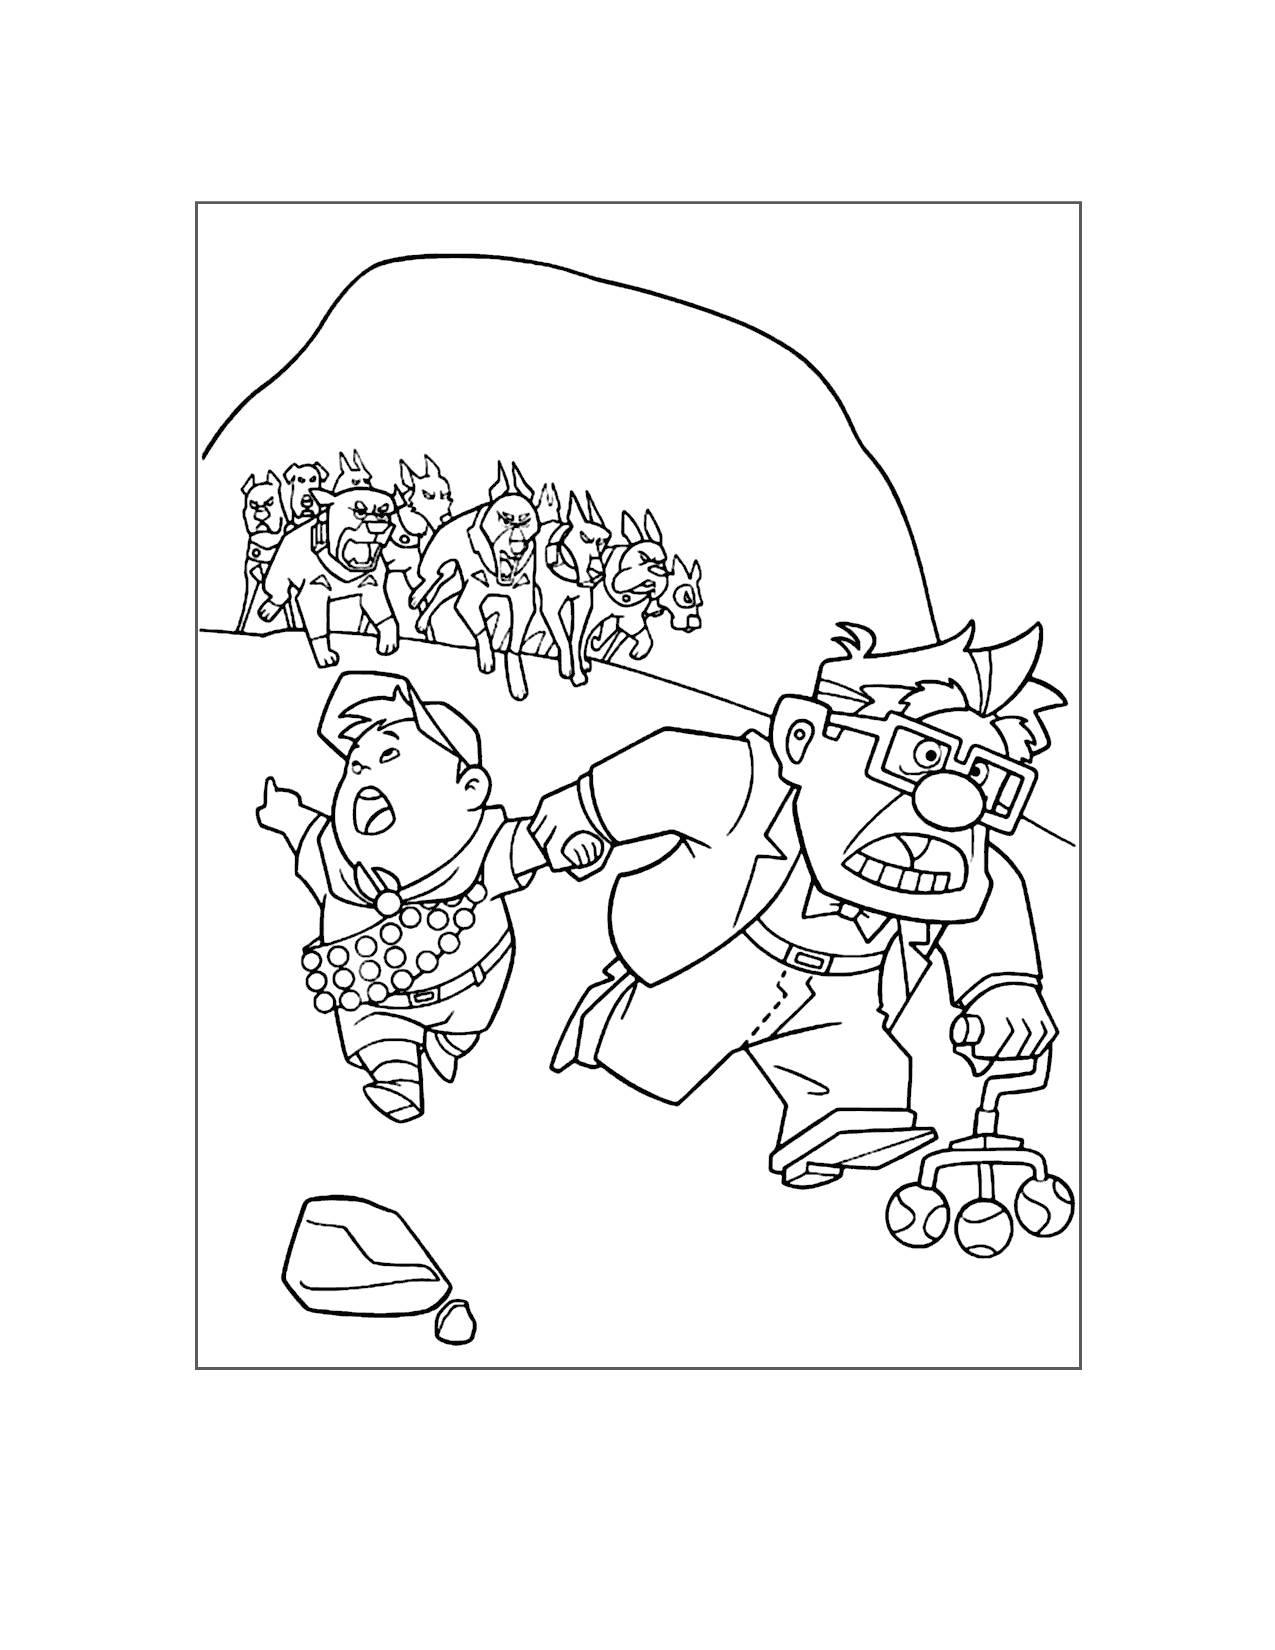 Dogs Chase Carl And Russell Up Coloring Page